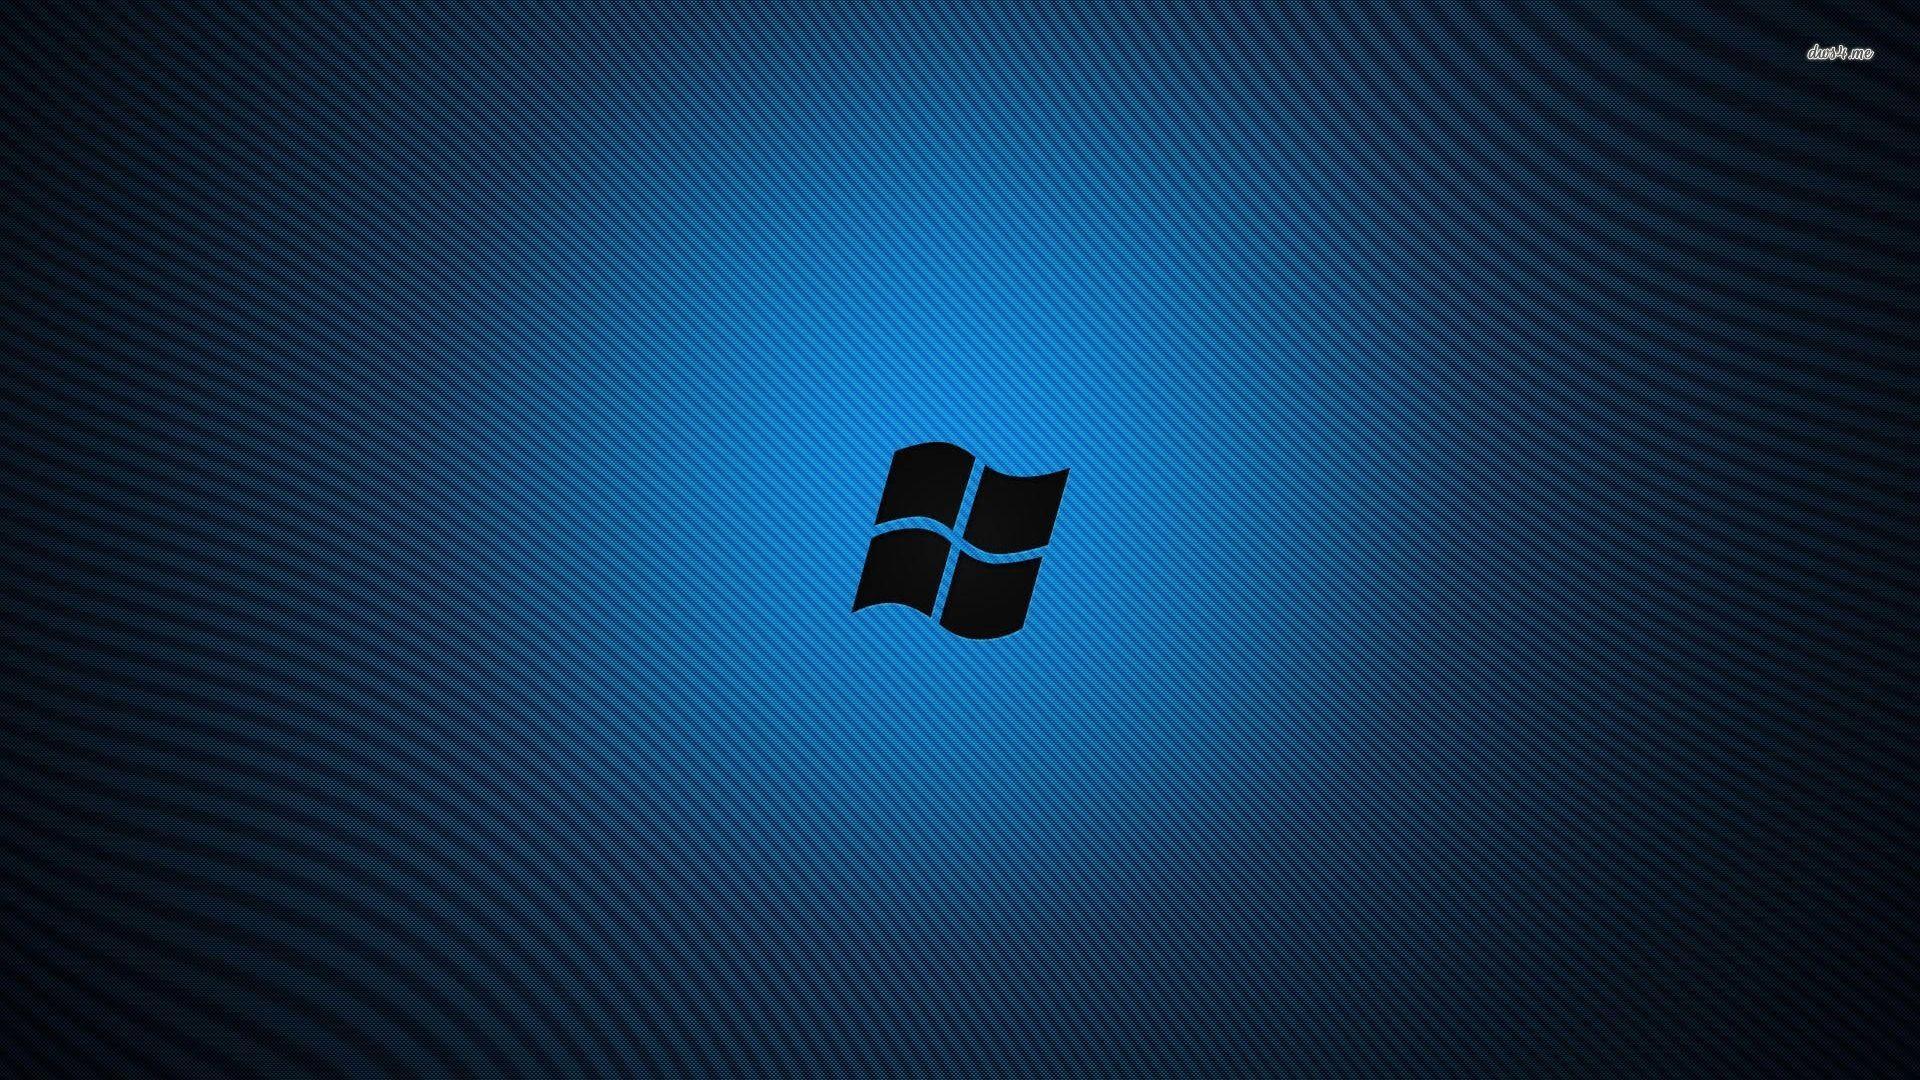 Windows Logo Wallpapers - Wallpaper Cave Full Hd Wallpapers For Windows 8 1920x1080